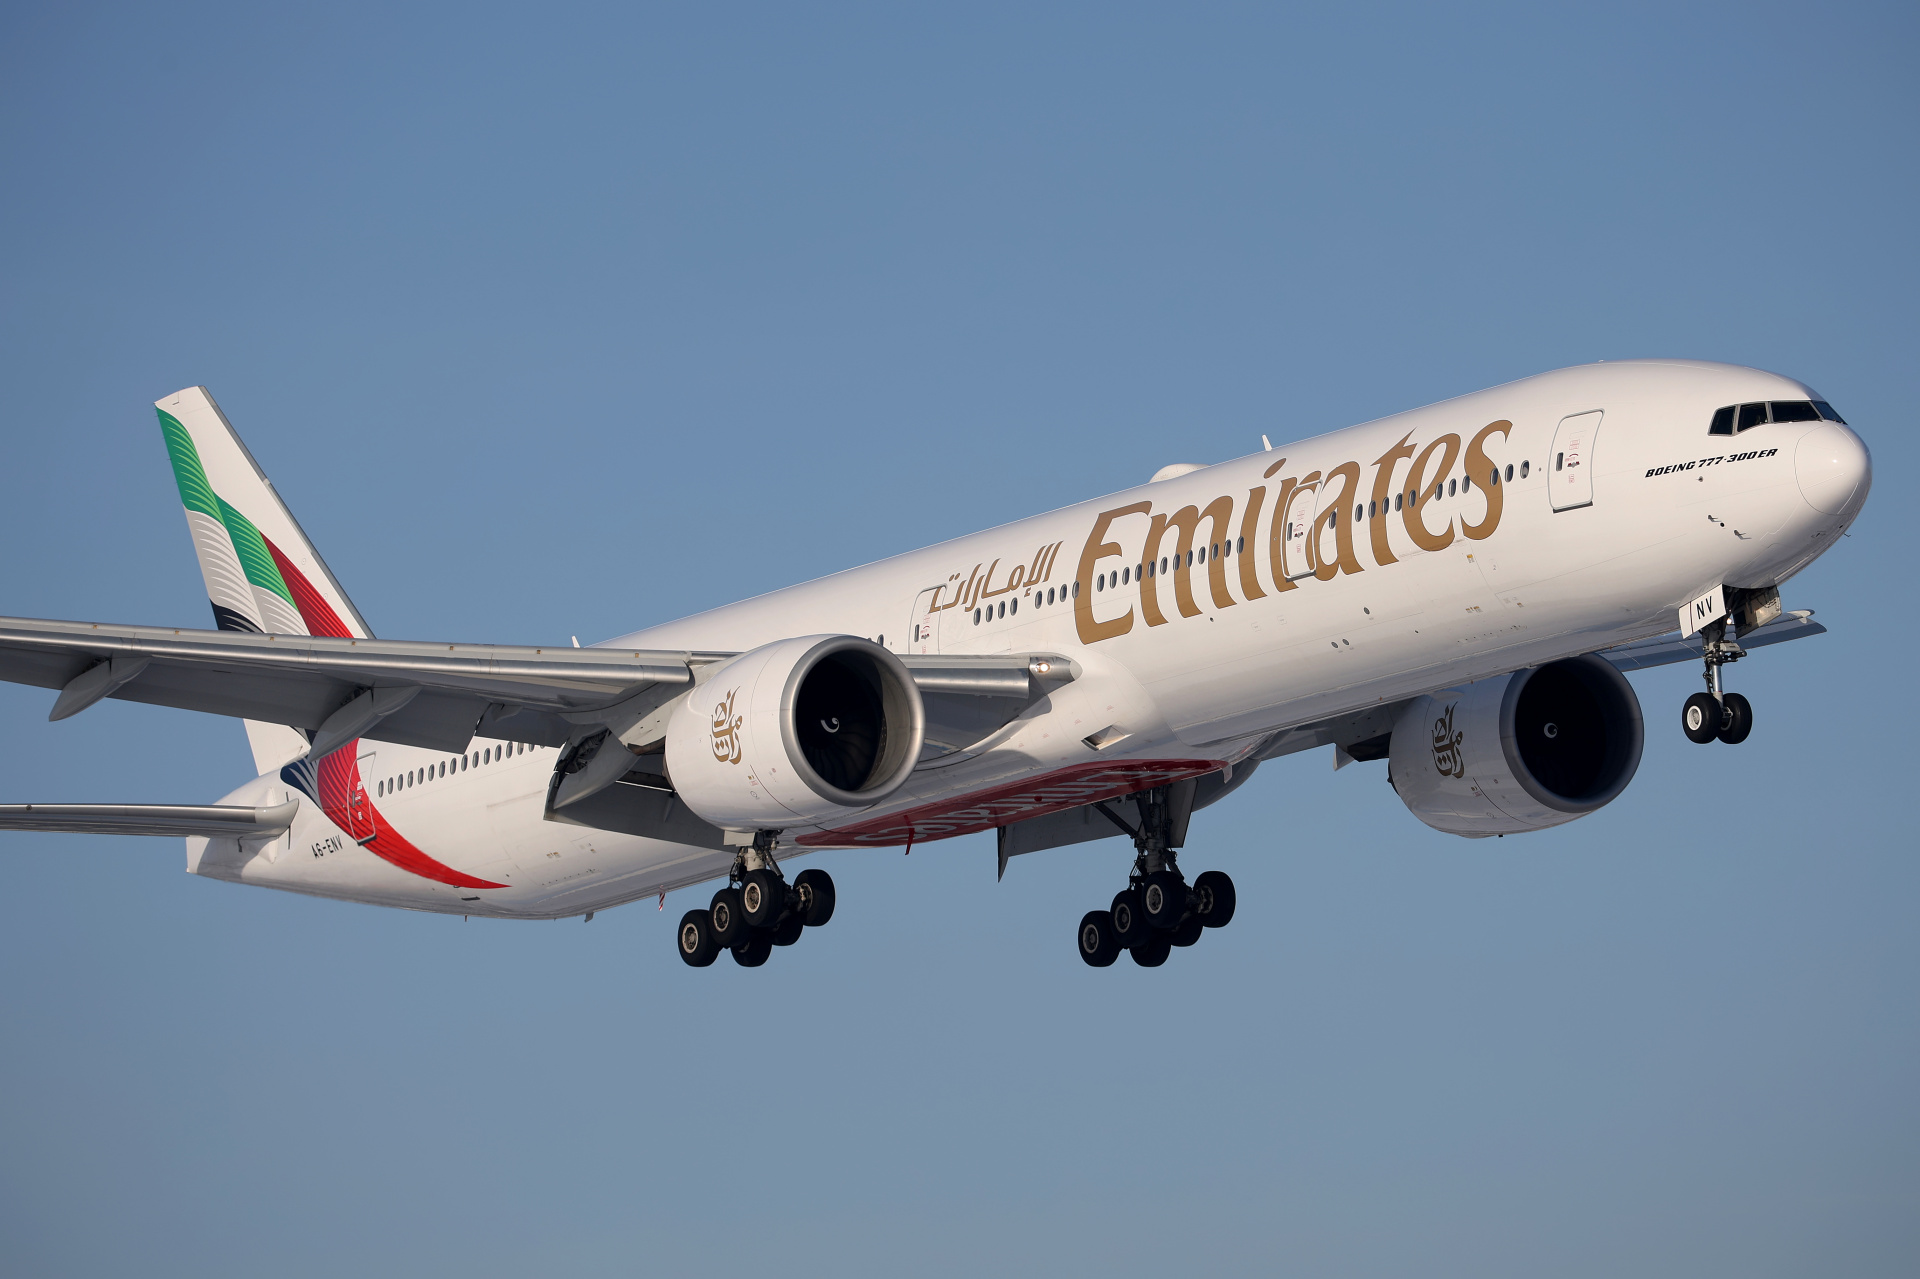 A6-ENV (updated livery) (Aircraft » EPWA Spotting » Boeing 777-300ER » Emirates)